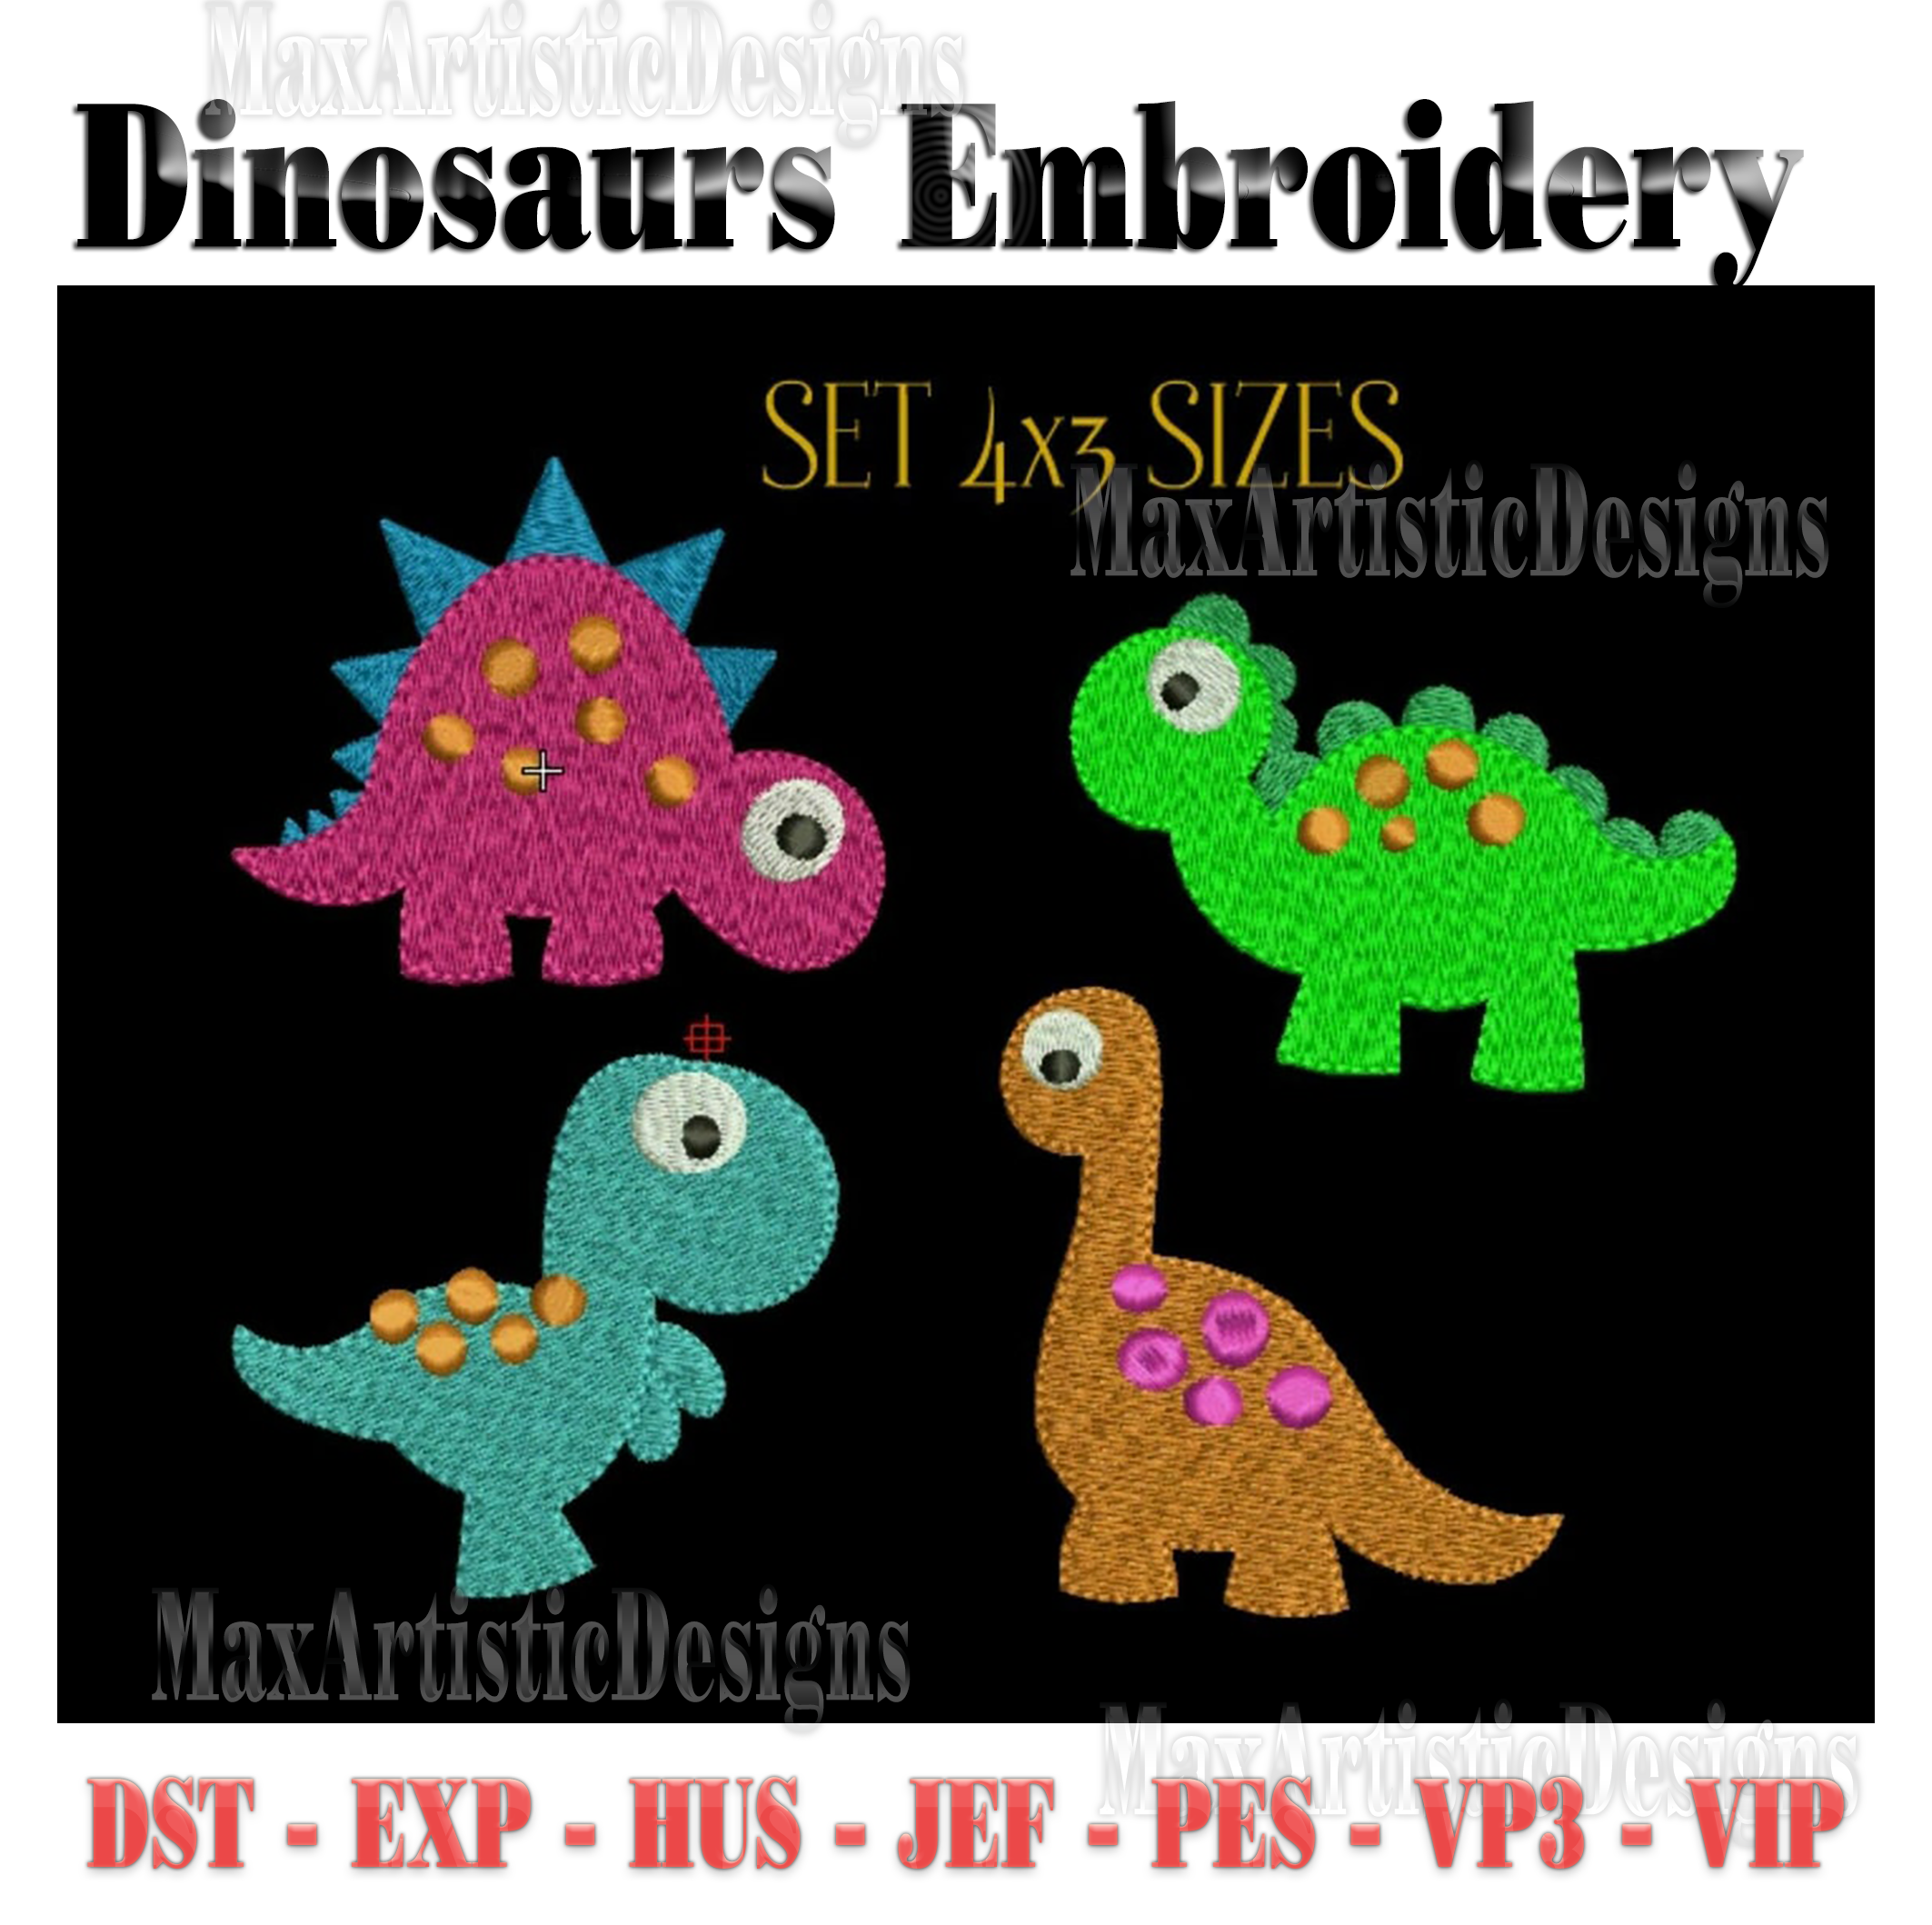 dinosaurs embroidery designs prehistoric animals in hus dst vip pes vp3 jef formats